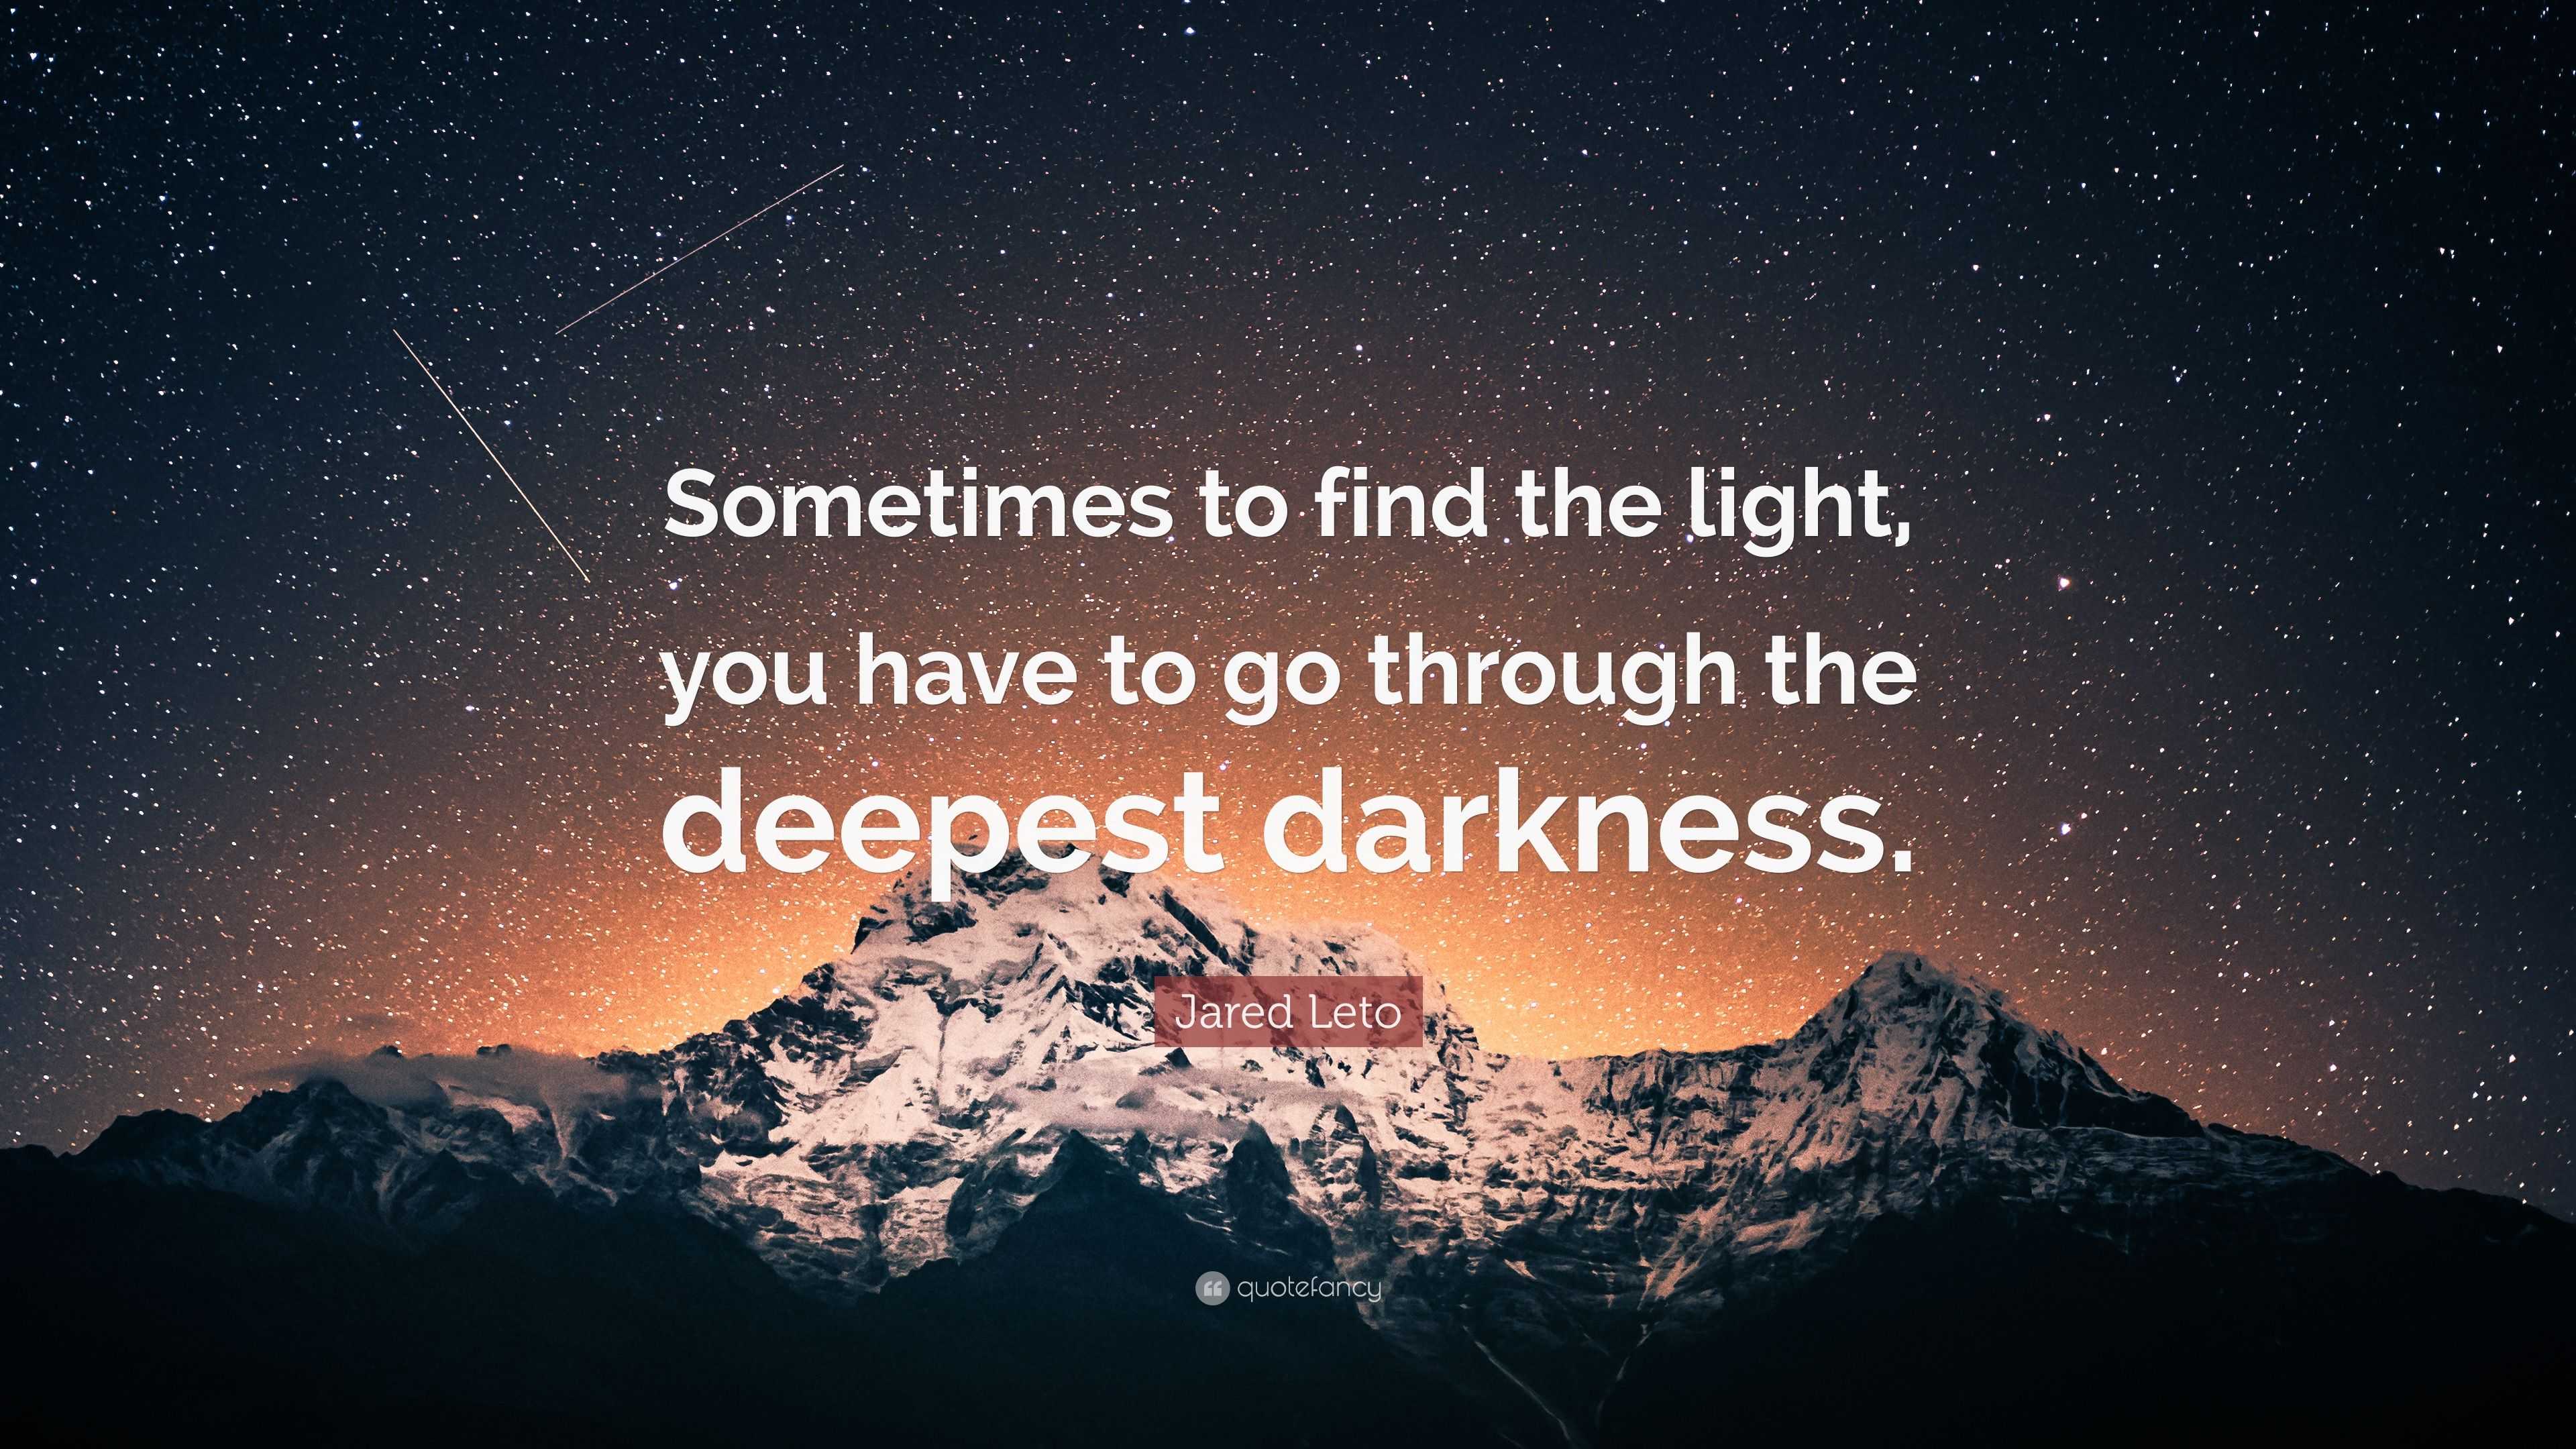 Jared Leto Quote “sometimes To Find The Light You Have To Go Through